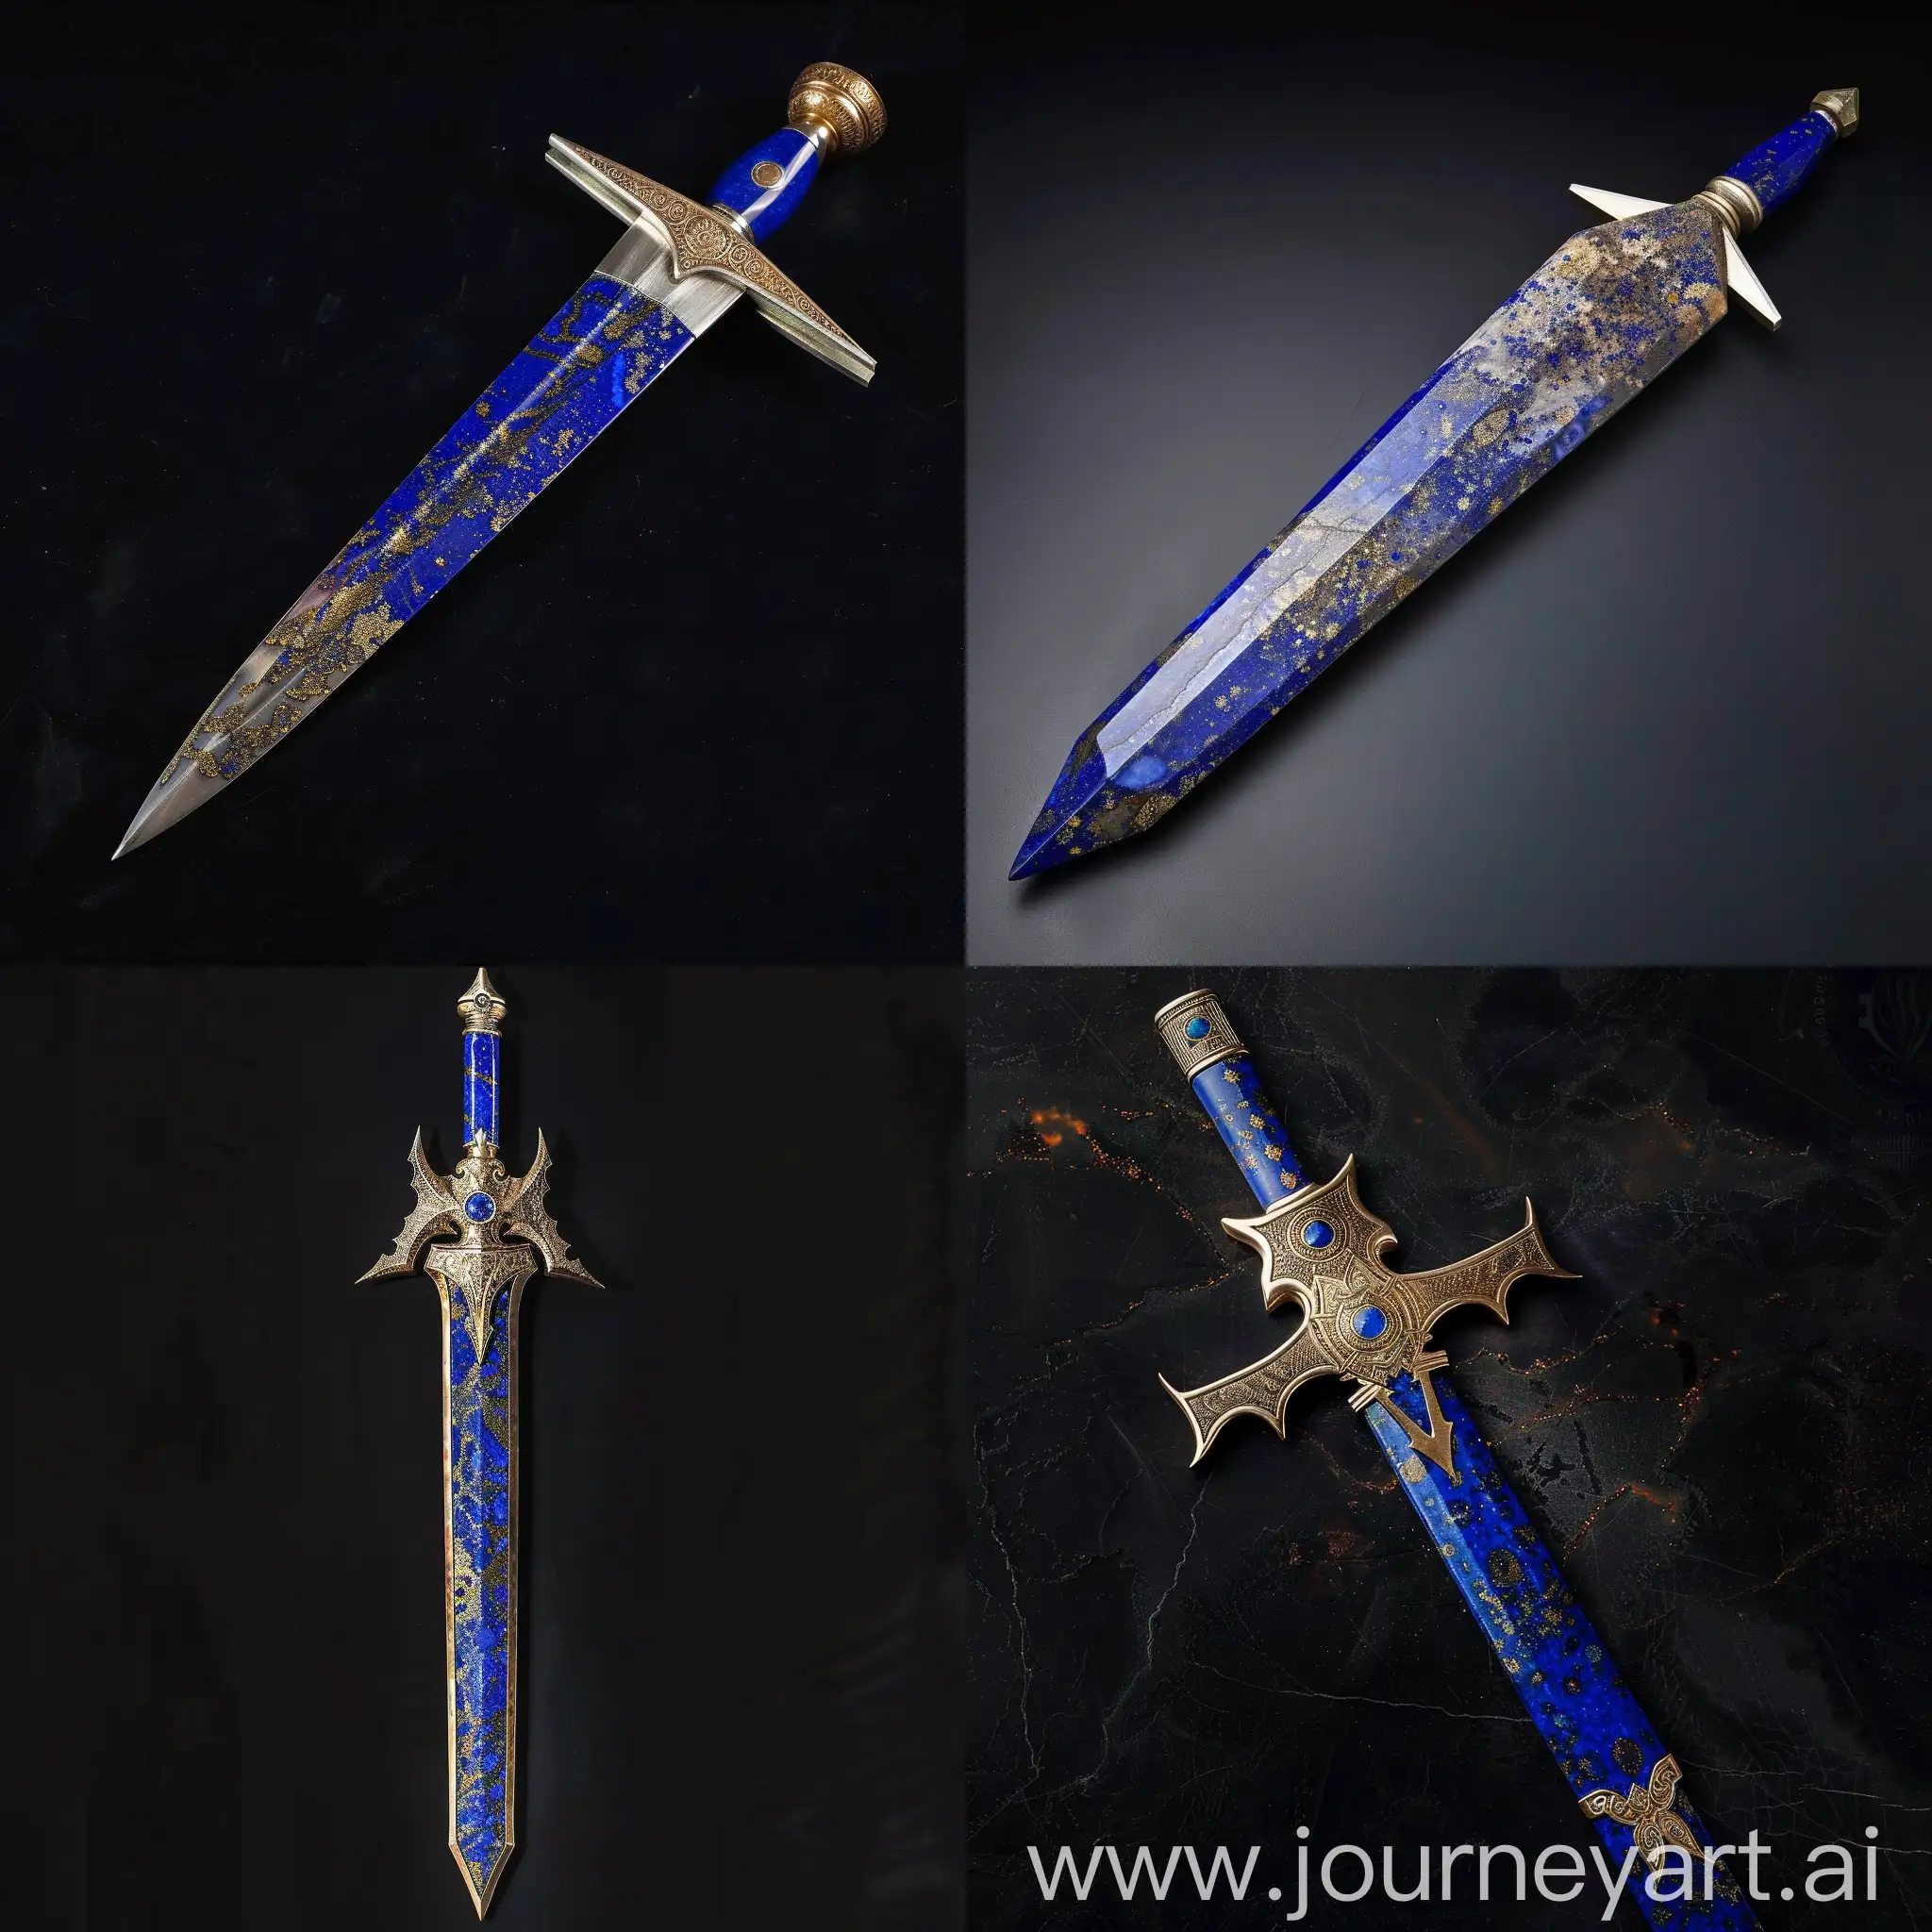 Mystical-Lapis-Lazuli-Sword-Ancient-Weapon-of-Power-and-Elegance